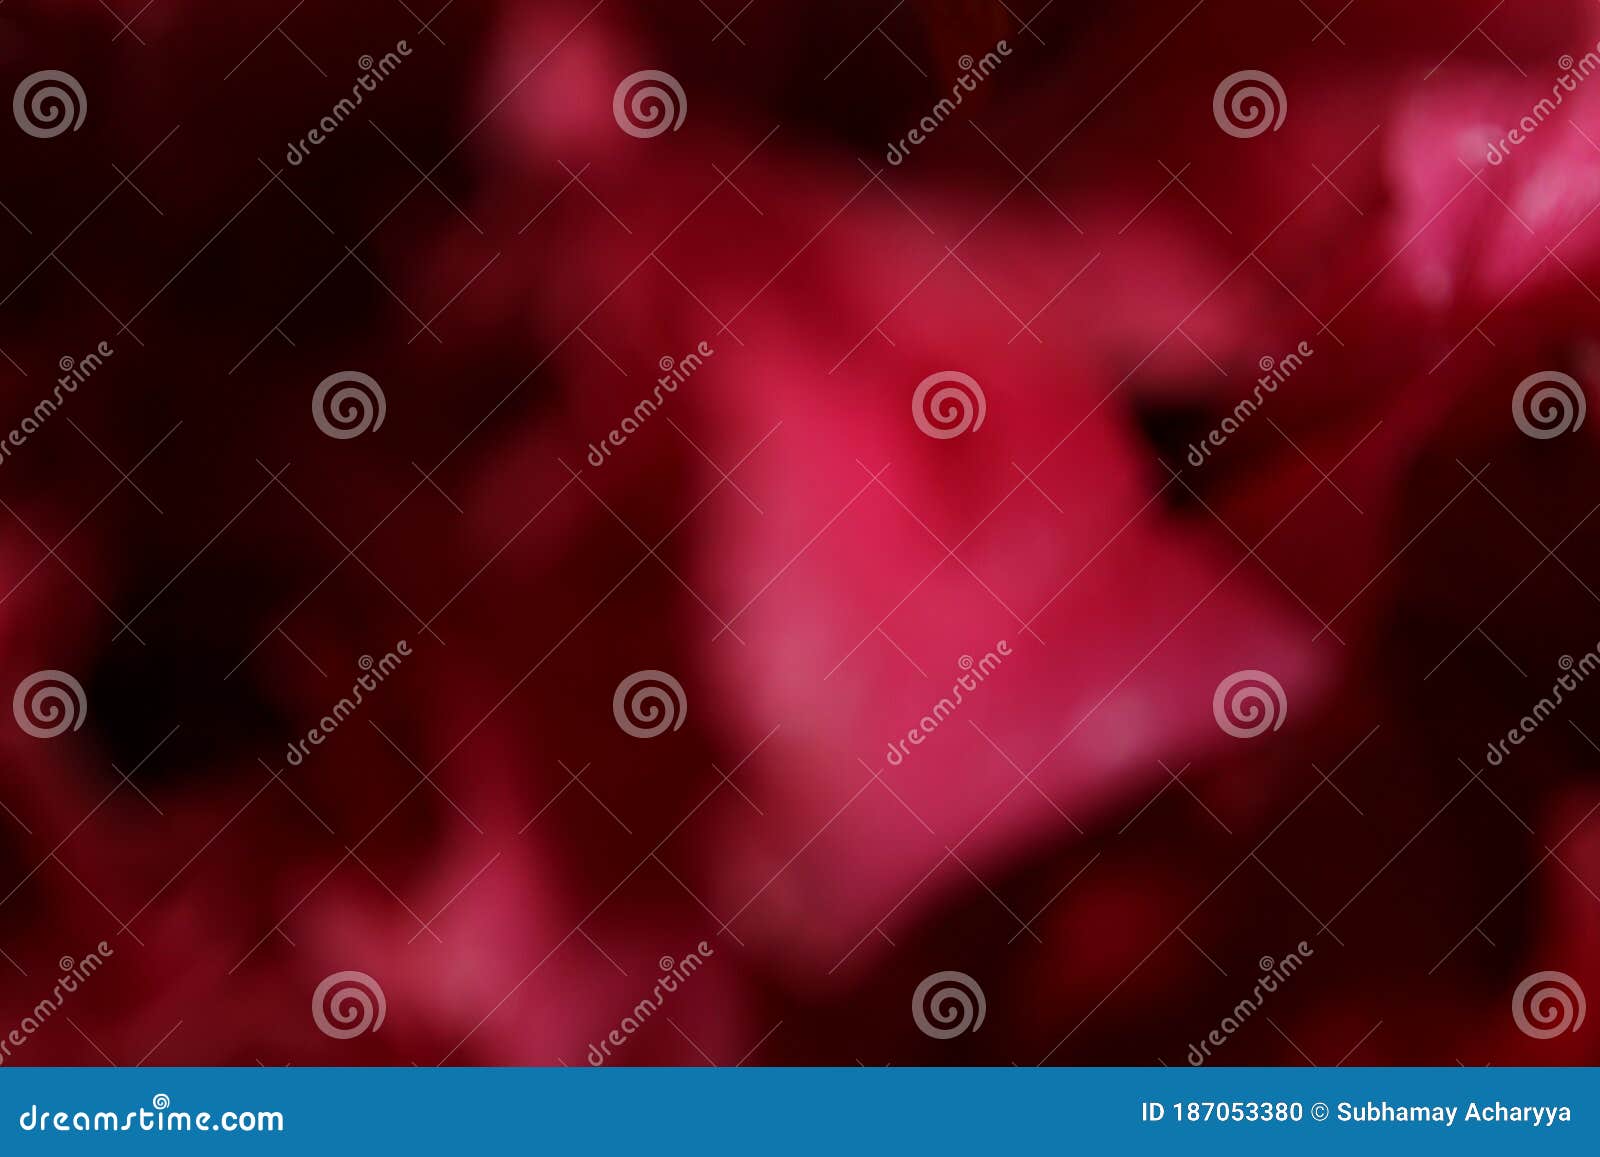 Abstract Red and Black Background Wallpaper. Beautiful Abstract Mixed  Colors Display Stock Photo - Image of flow, colors: 187053380